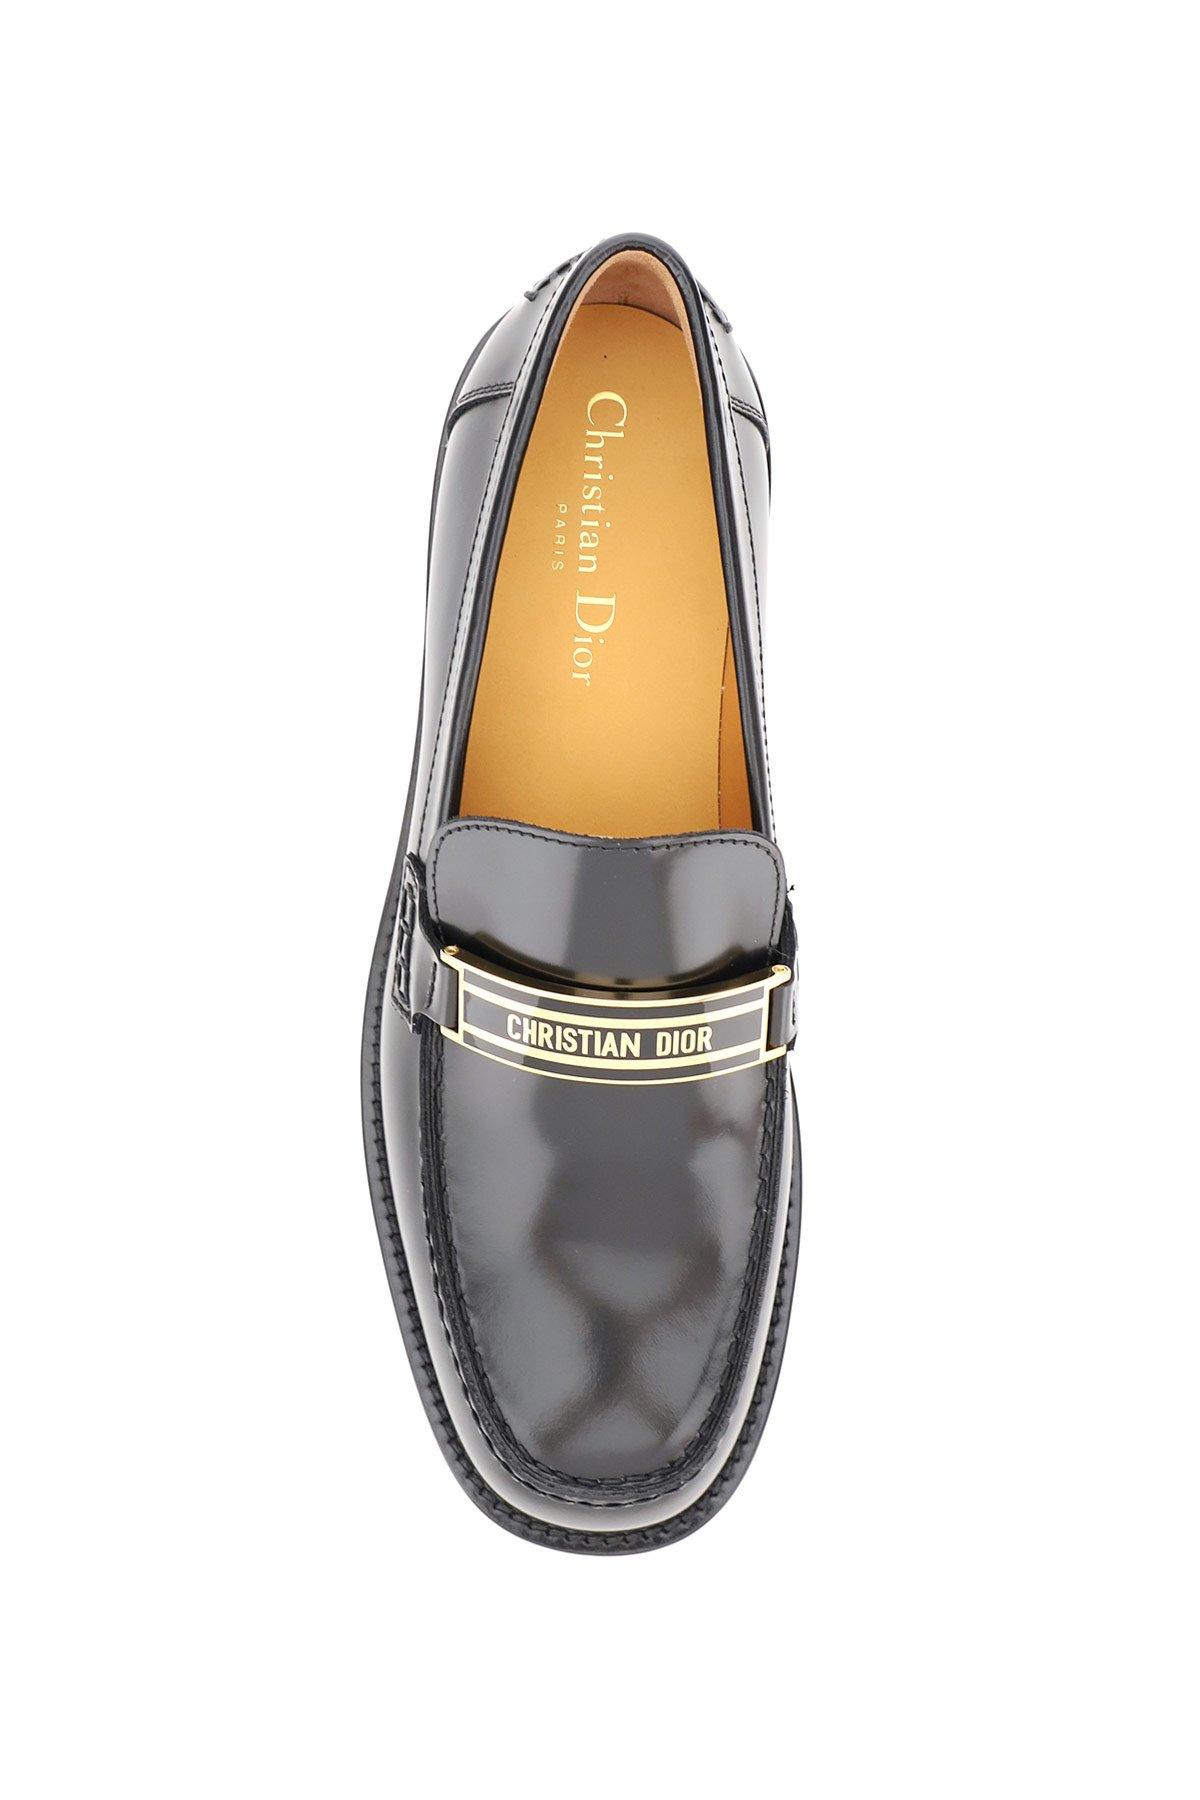 Dior Code Leather Loafers in Black - Lyst